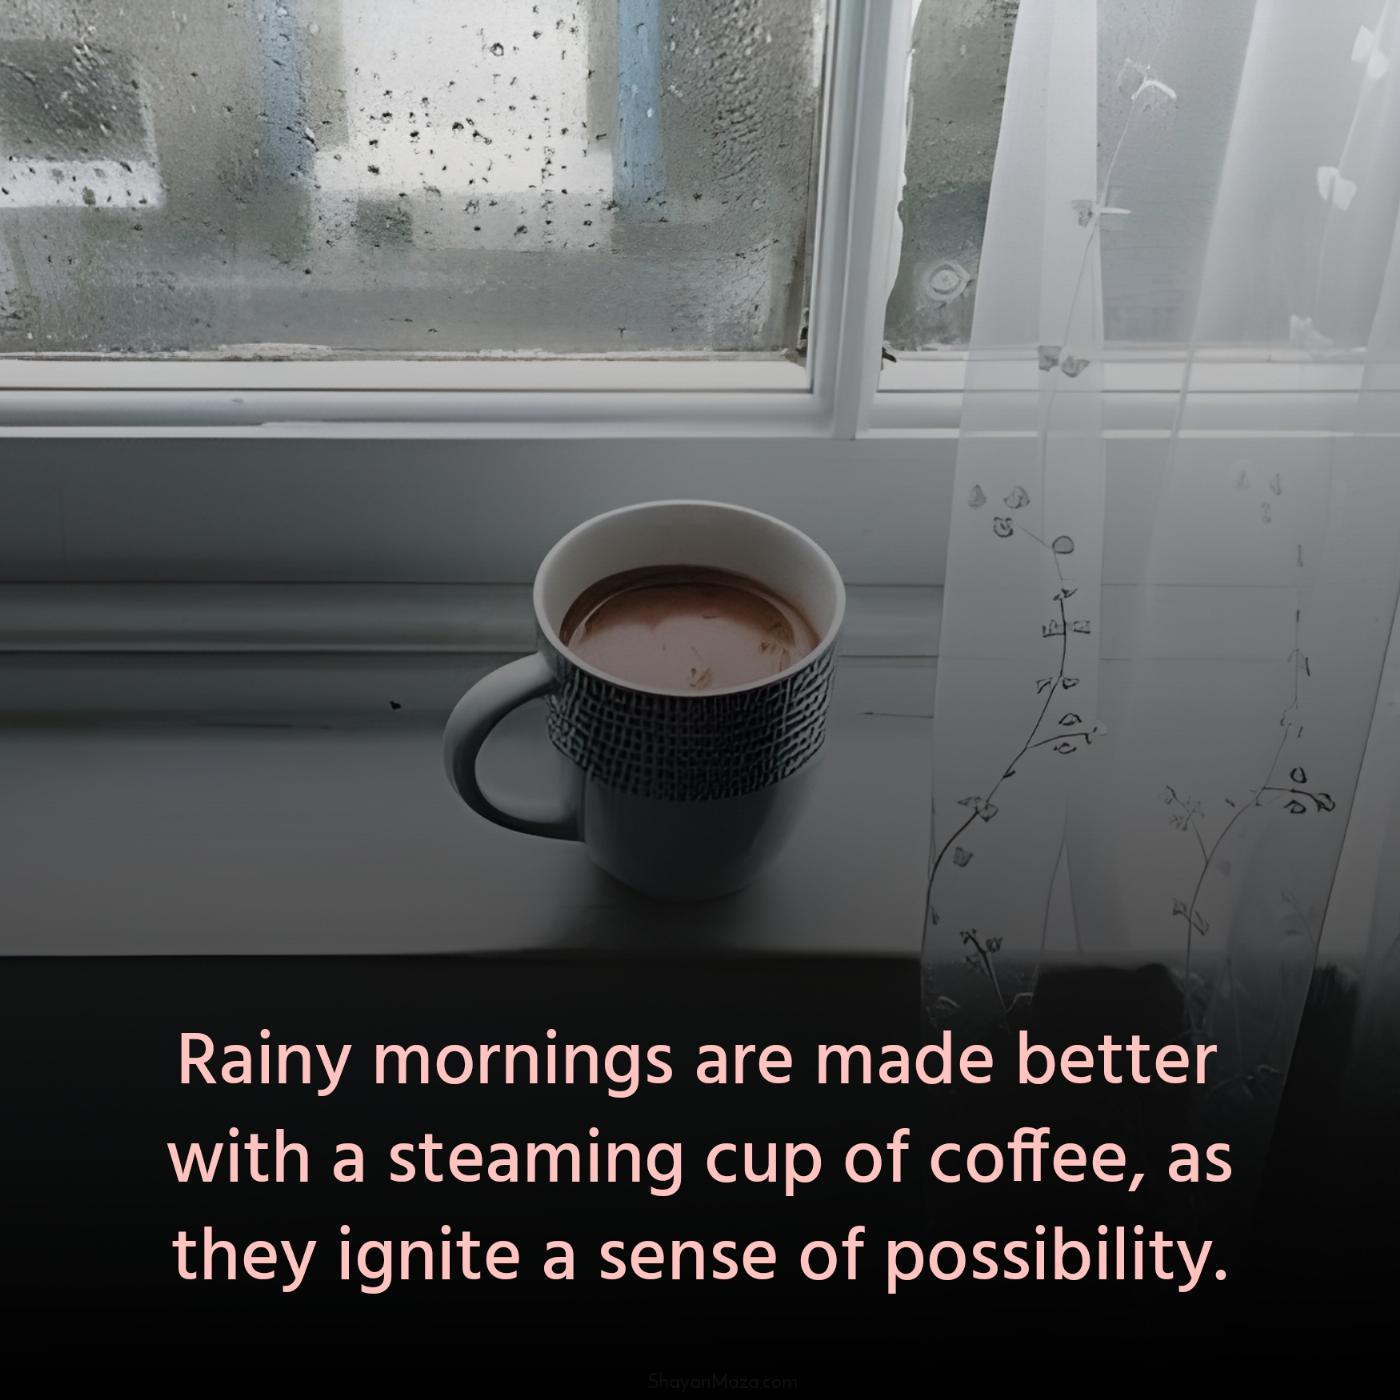 Rainy mornings are made better with a steaming cup of coffee